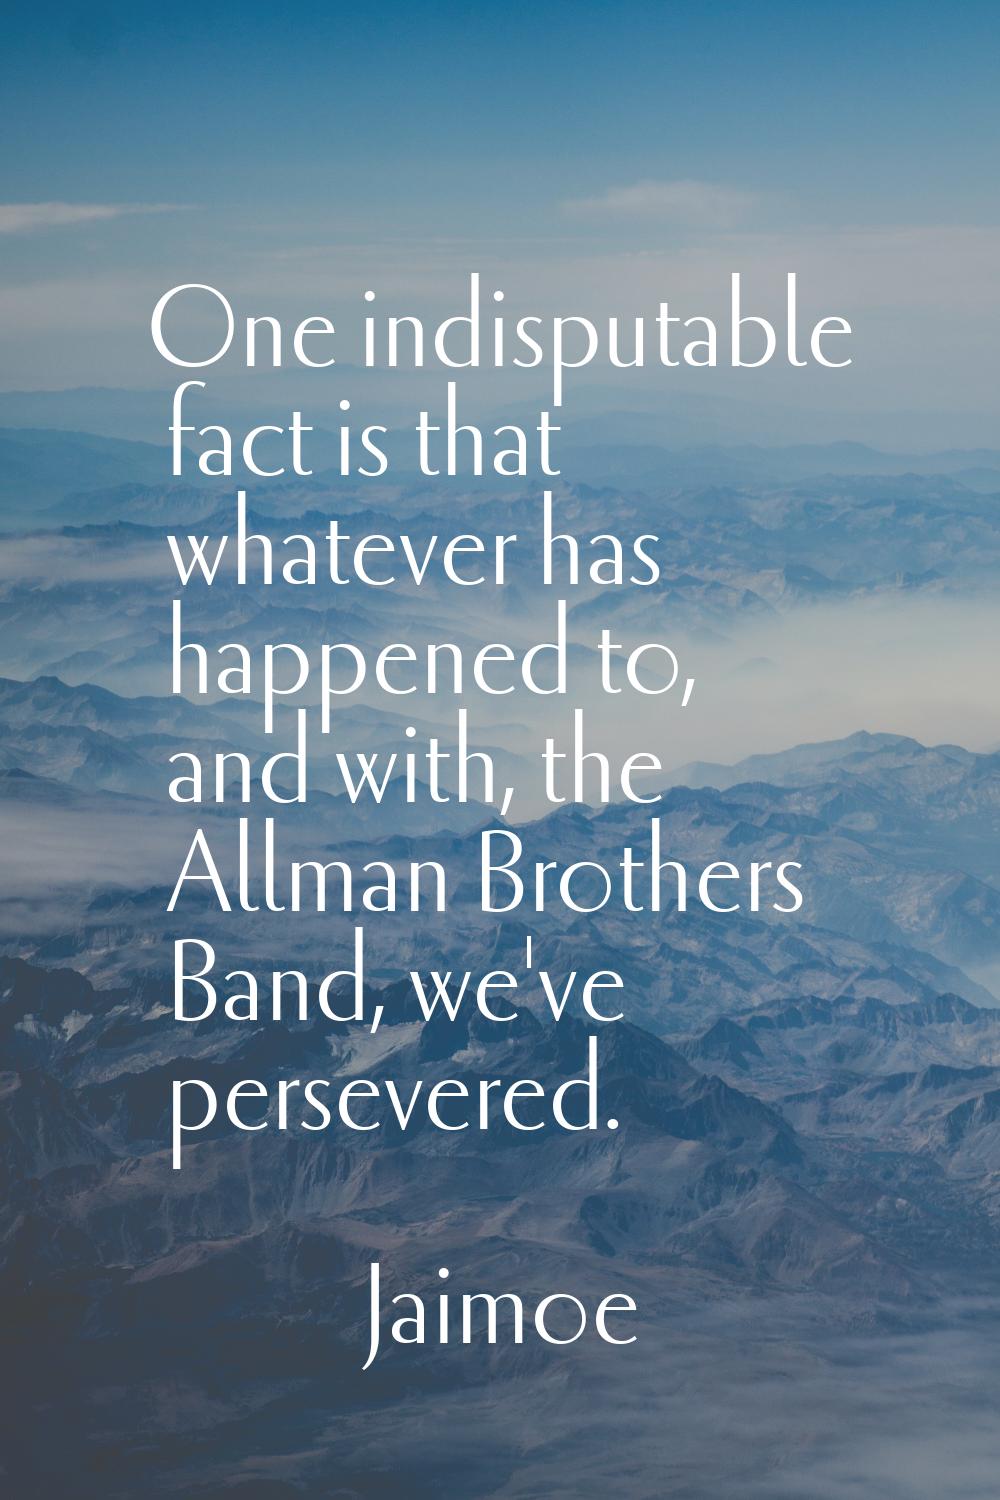 One indisputable fact is that whatever has happened to, and with, the Allman Brothers Band, we've p